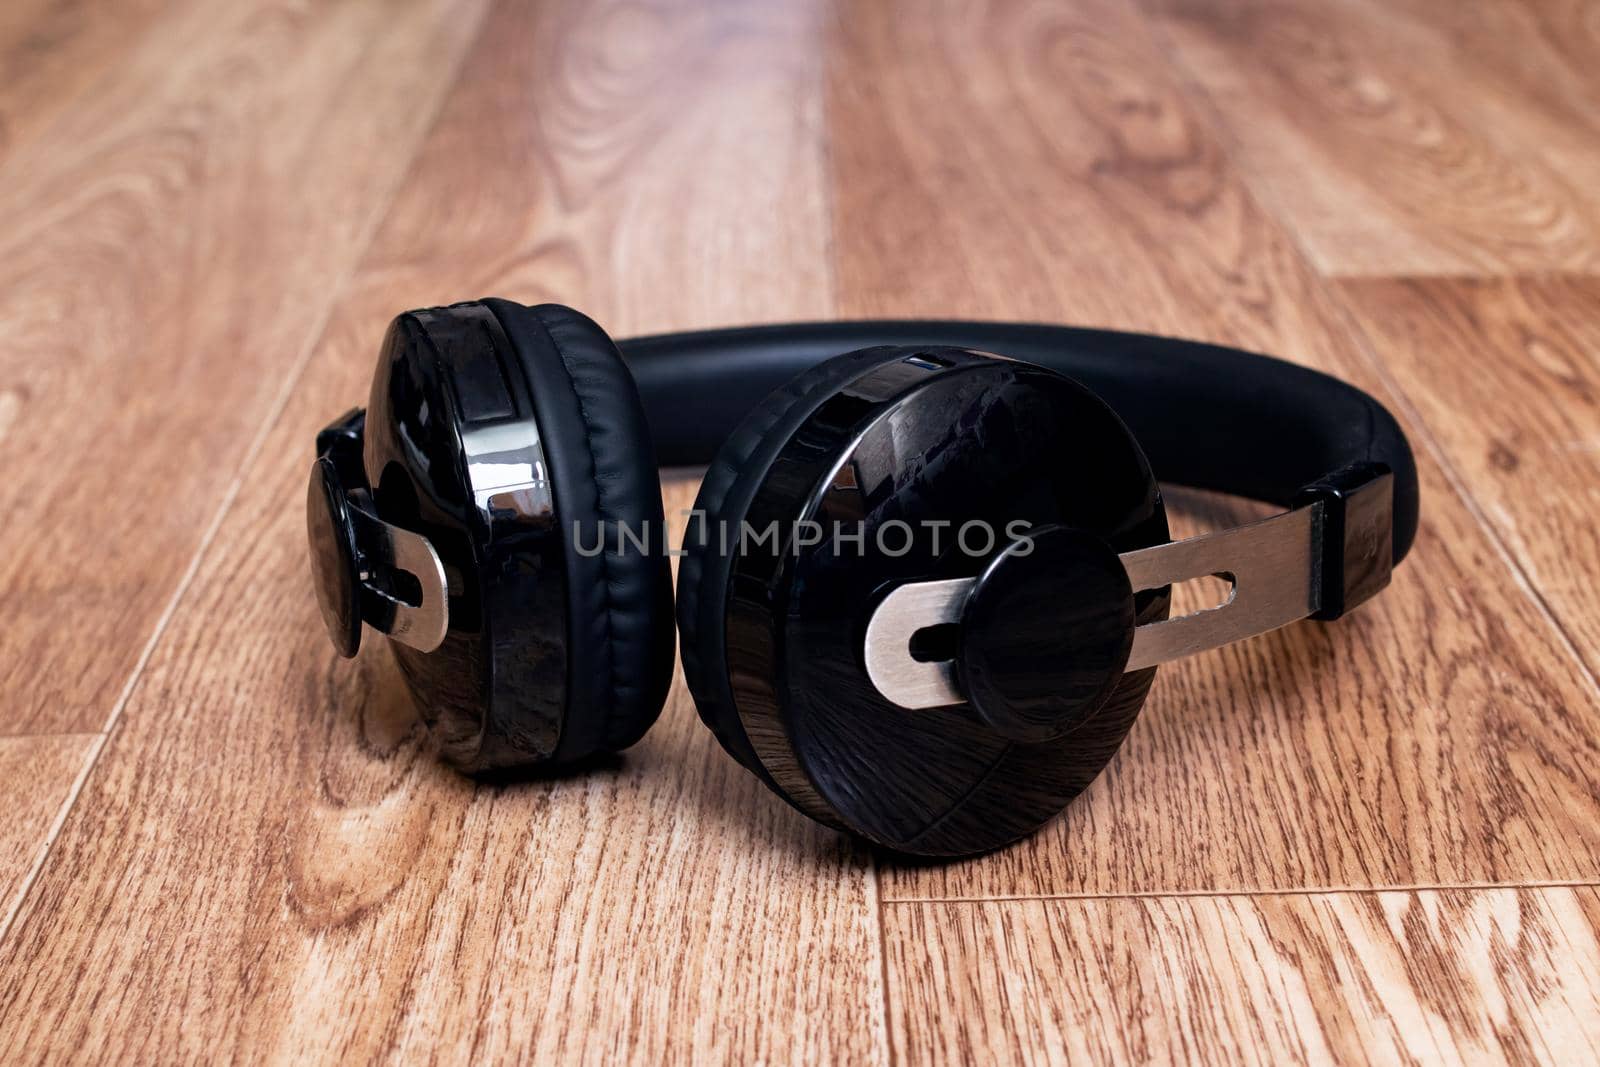 Headphones on a wooden table close up by Vera1703